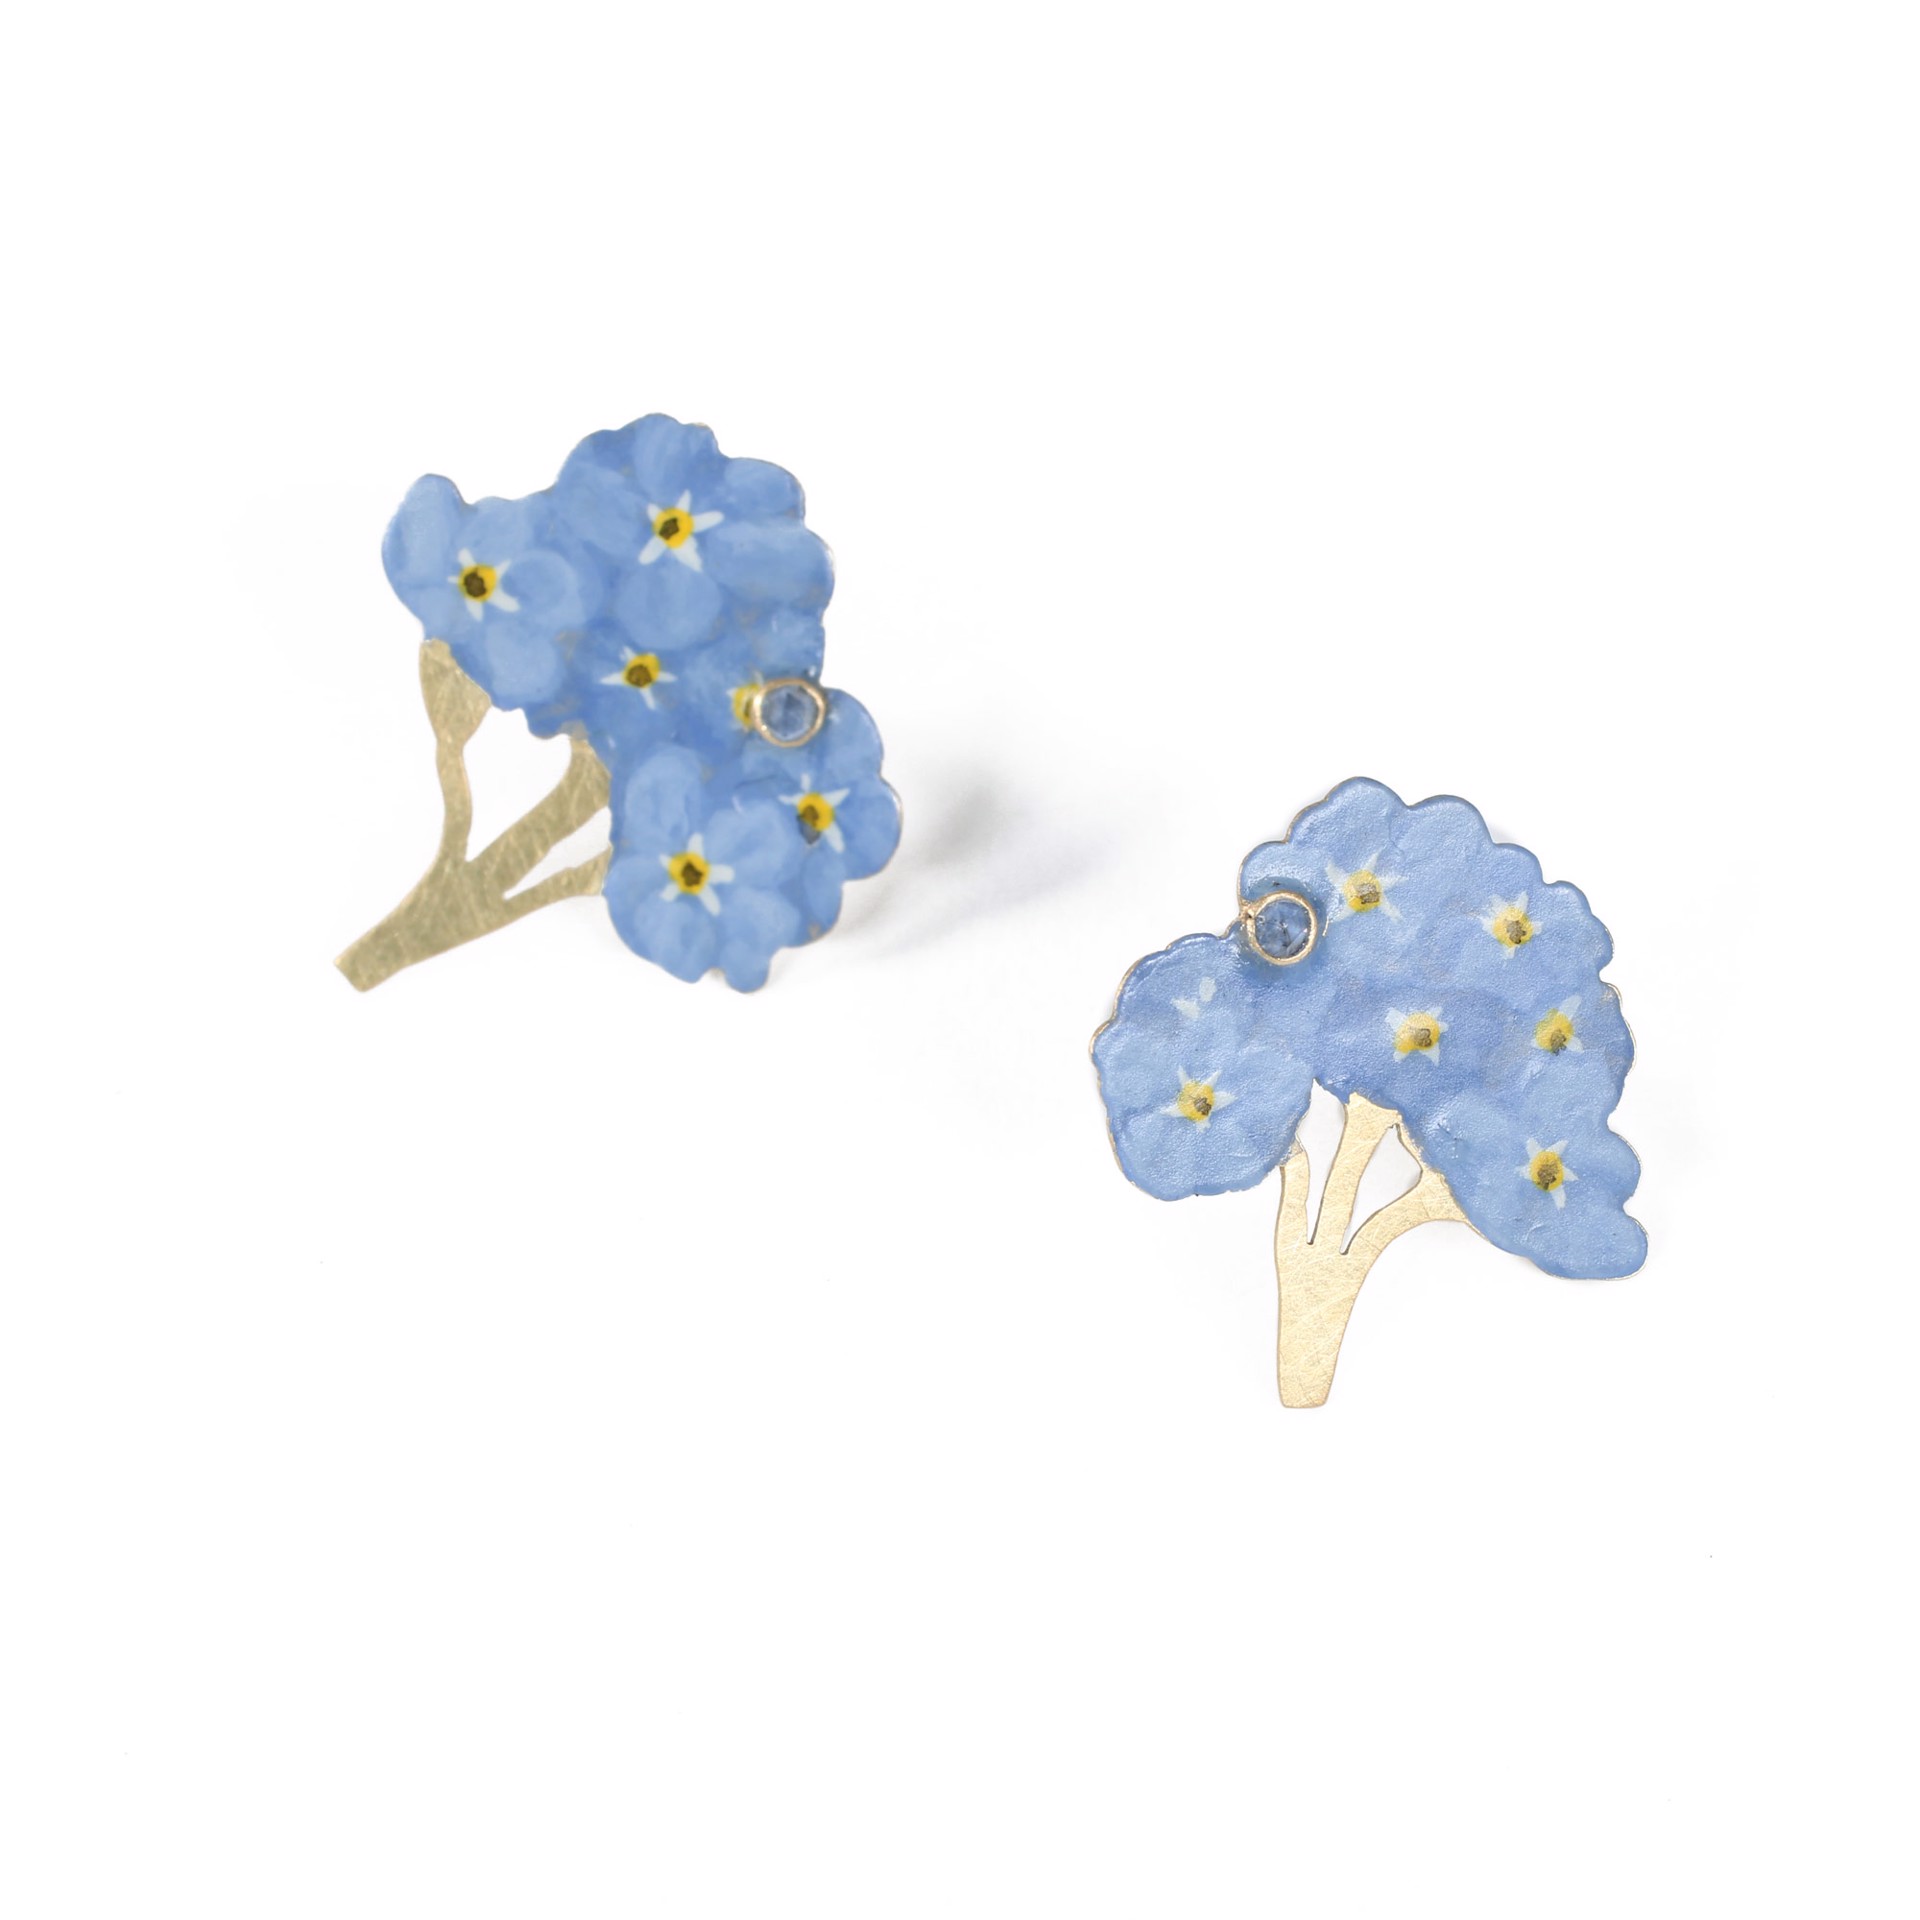 Natura Morta: Forget-Me-Not Earrings by Christopher Thompson-Royds